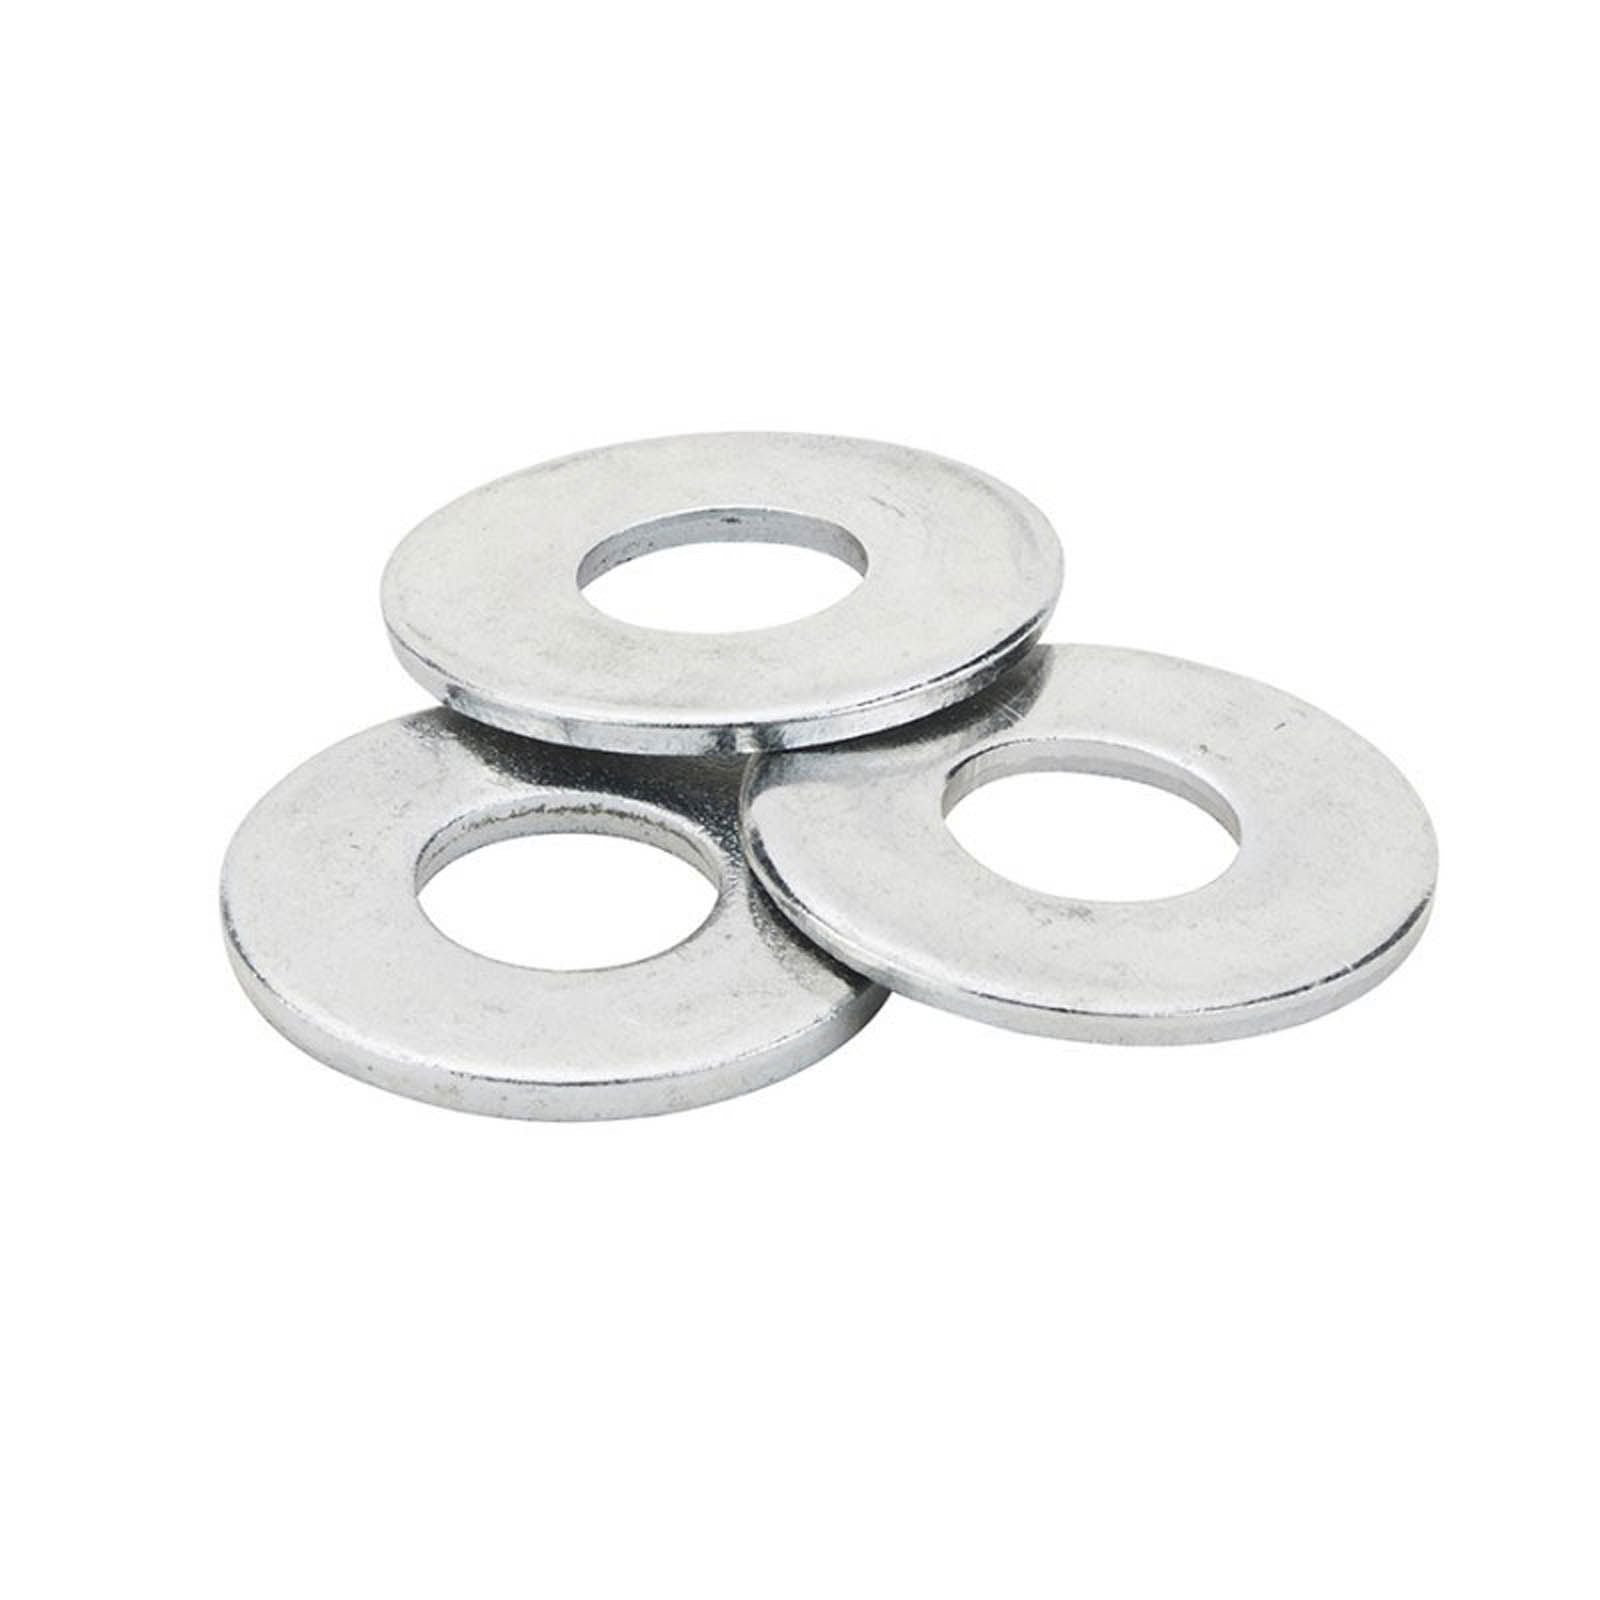 New WHITES Washer Flat Zinc Plated - 4mm (50 Pack) #HWW4